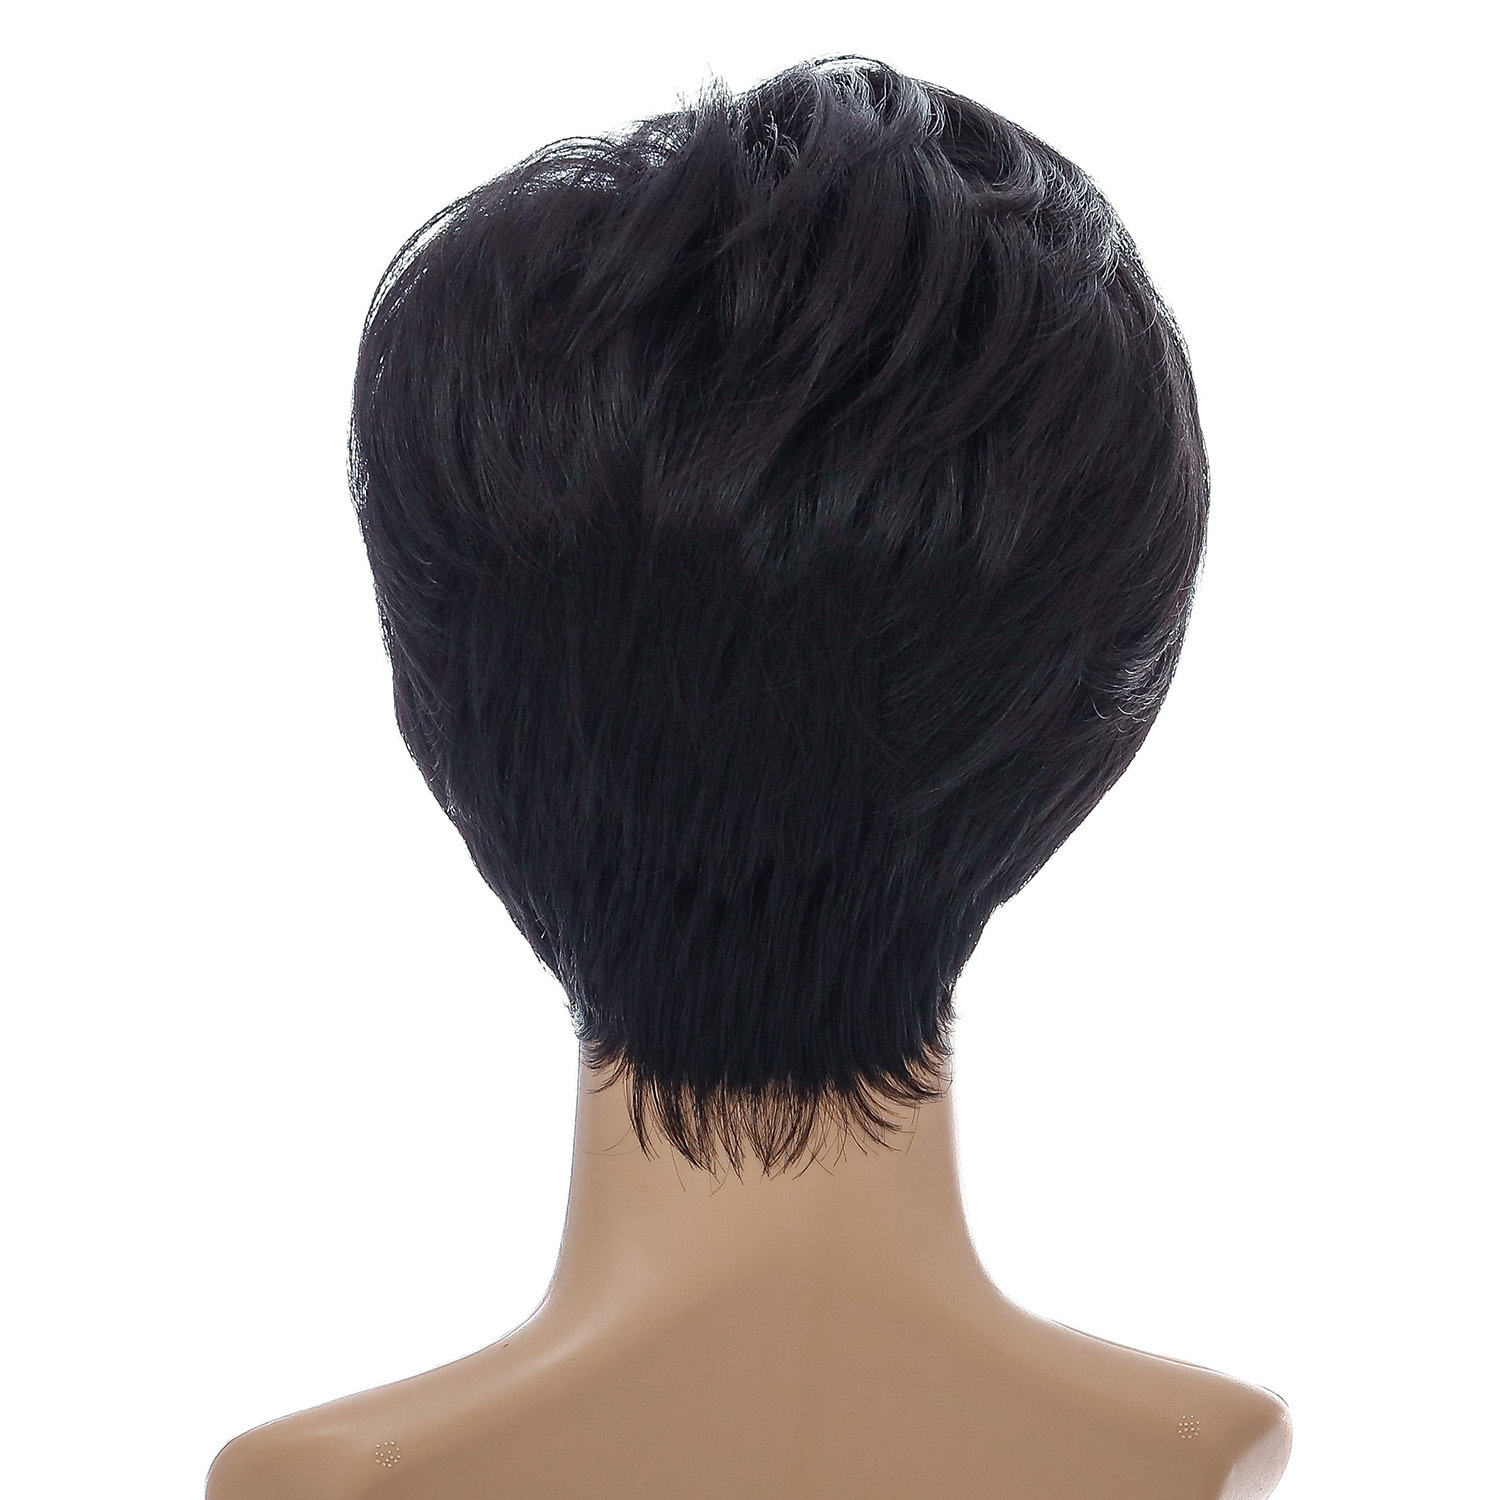 Fashionable black synthetic wig designed for women, featuring short straight hair